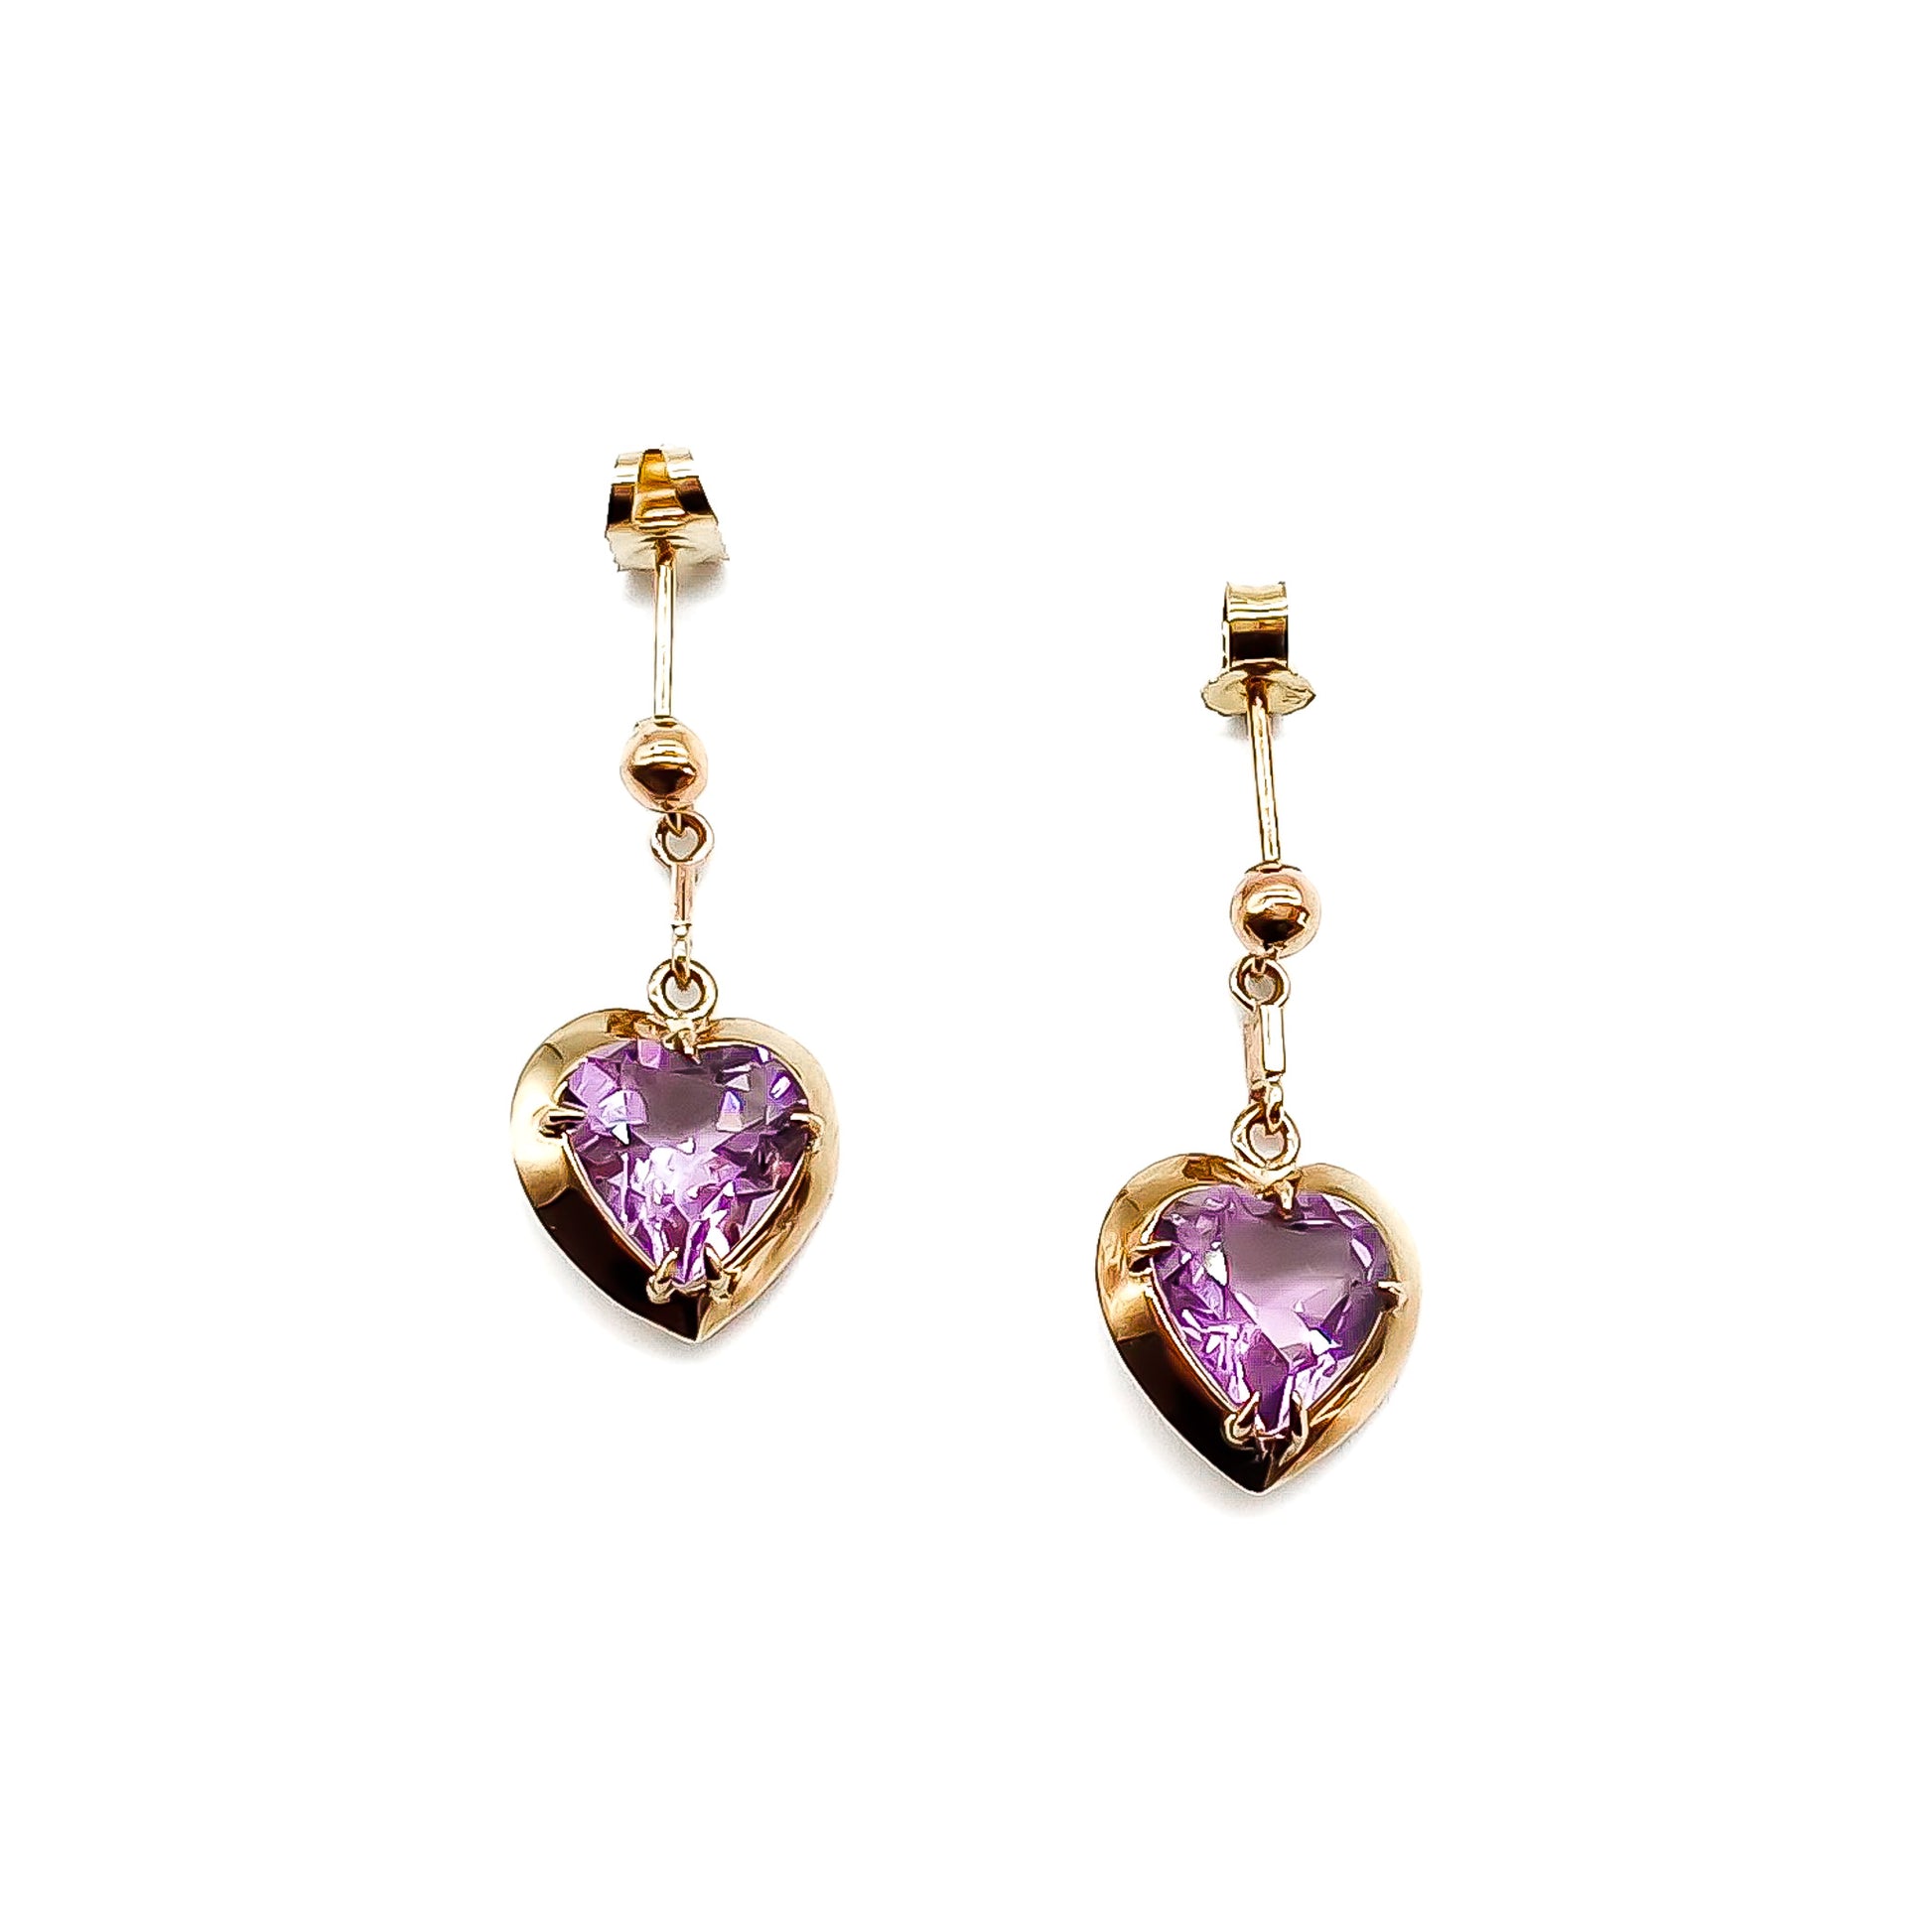 Pretty 9ct rose gold earrings set with heart-shaped faceted amethyst drops.